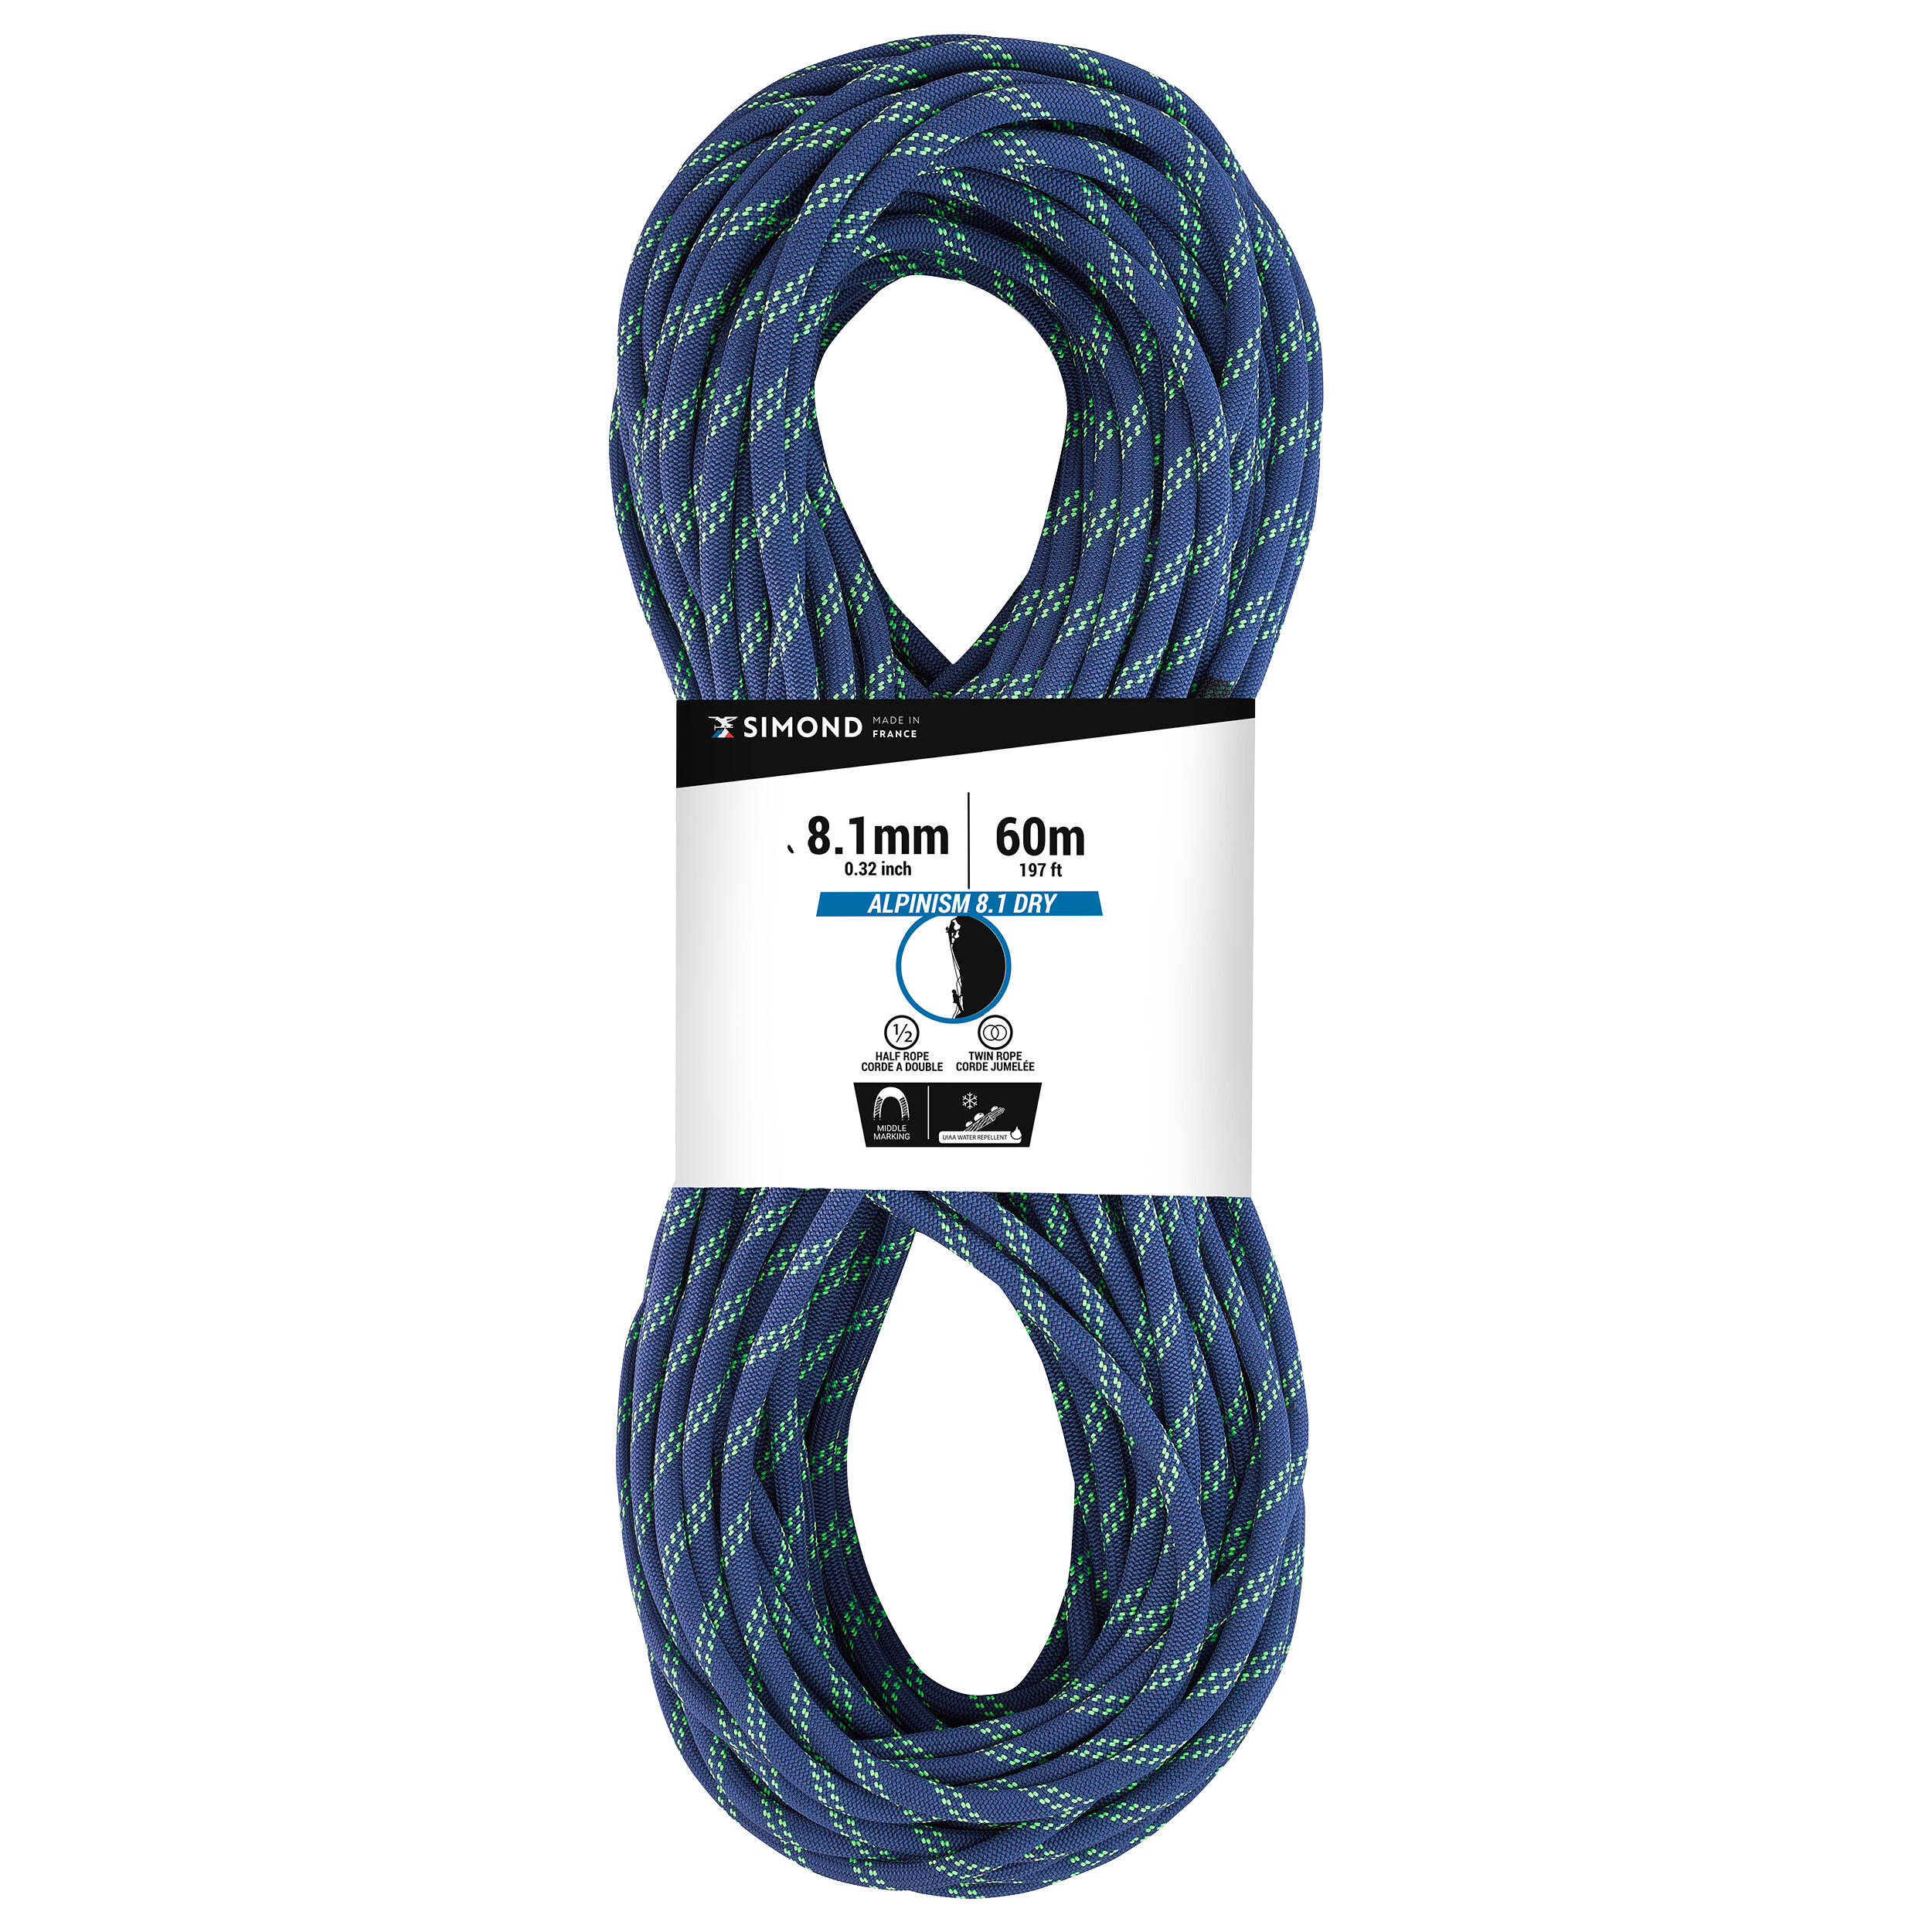 SIMOND CLIMBING AND MOUNTAINEERING HALF ROPE - ABSEIL ALPINISM 8.1 MM X 60M BLUE